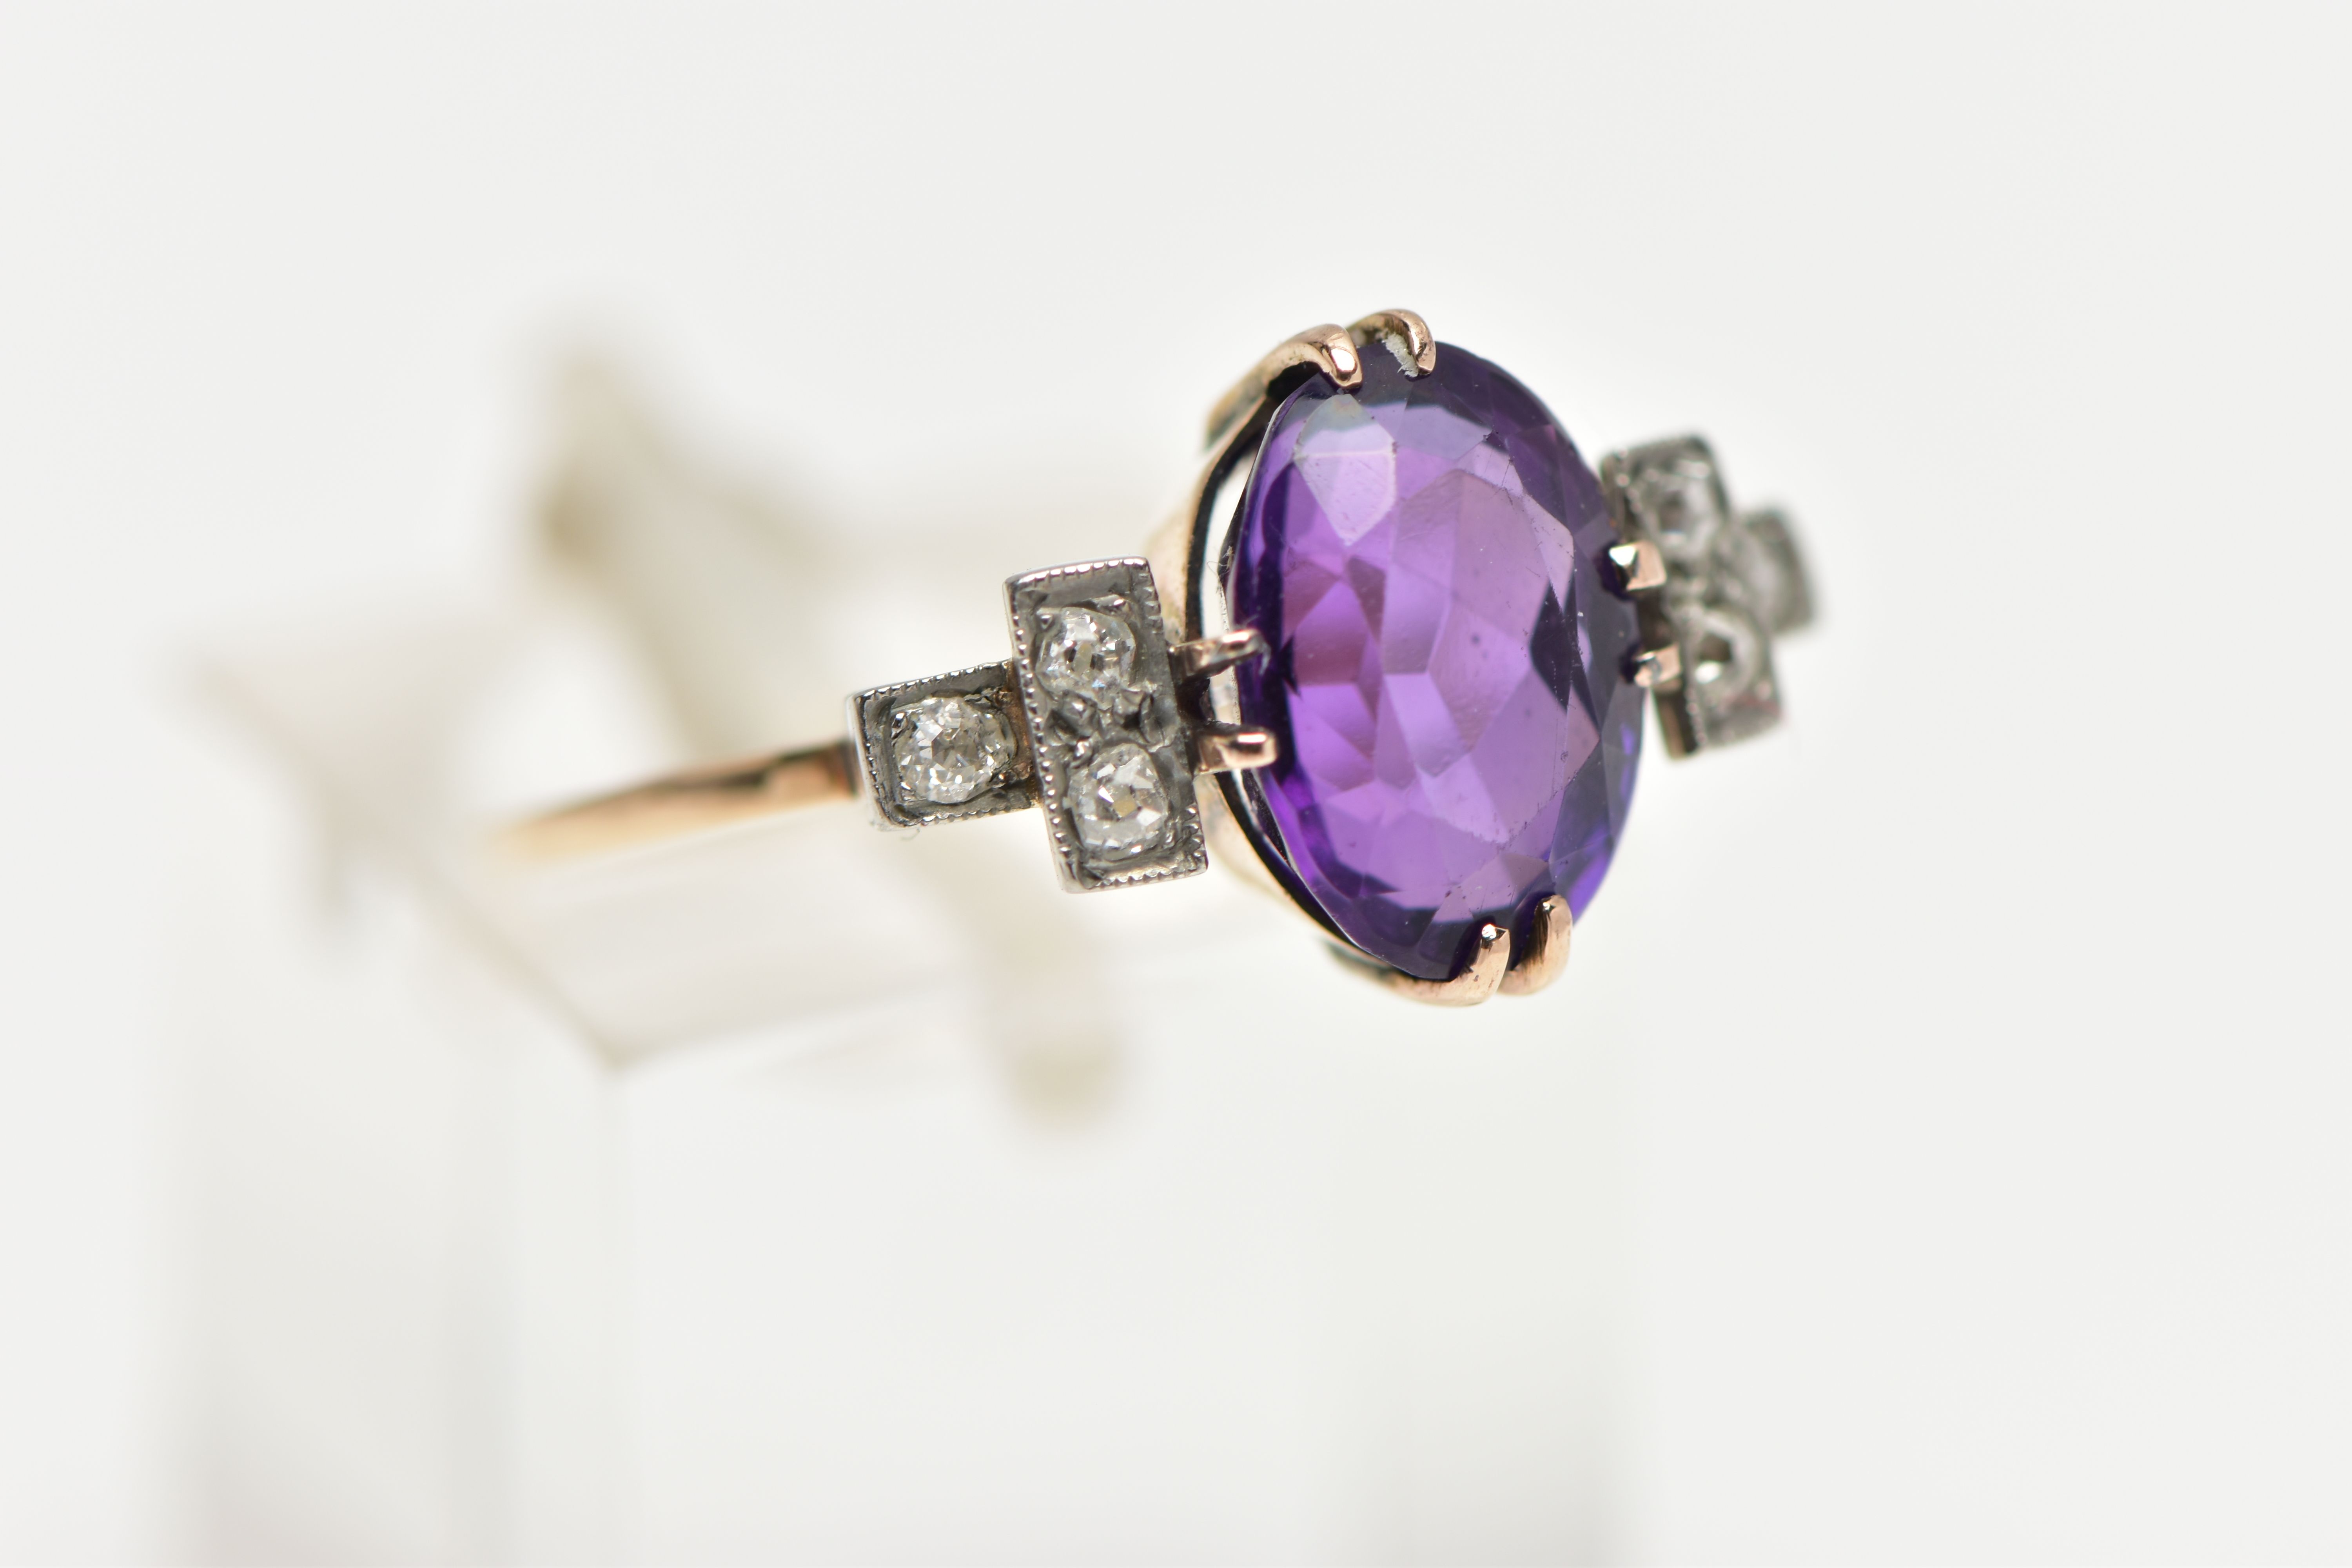 AN EARLY 20TH CENTURY DRESS RING, an oval cut deep purple amethyst, prong set in yellow gold, - Image 4 of 4